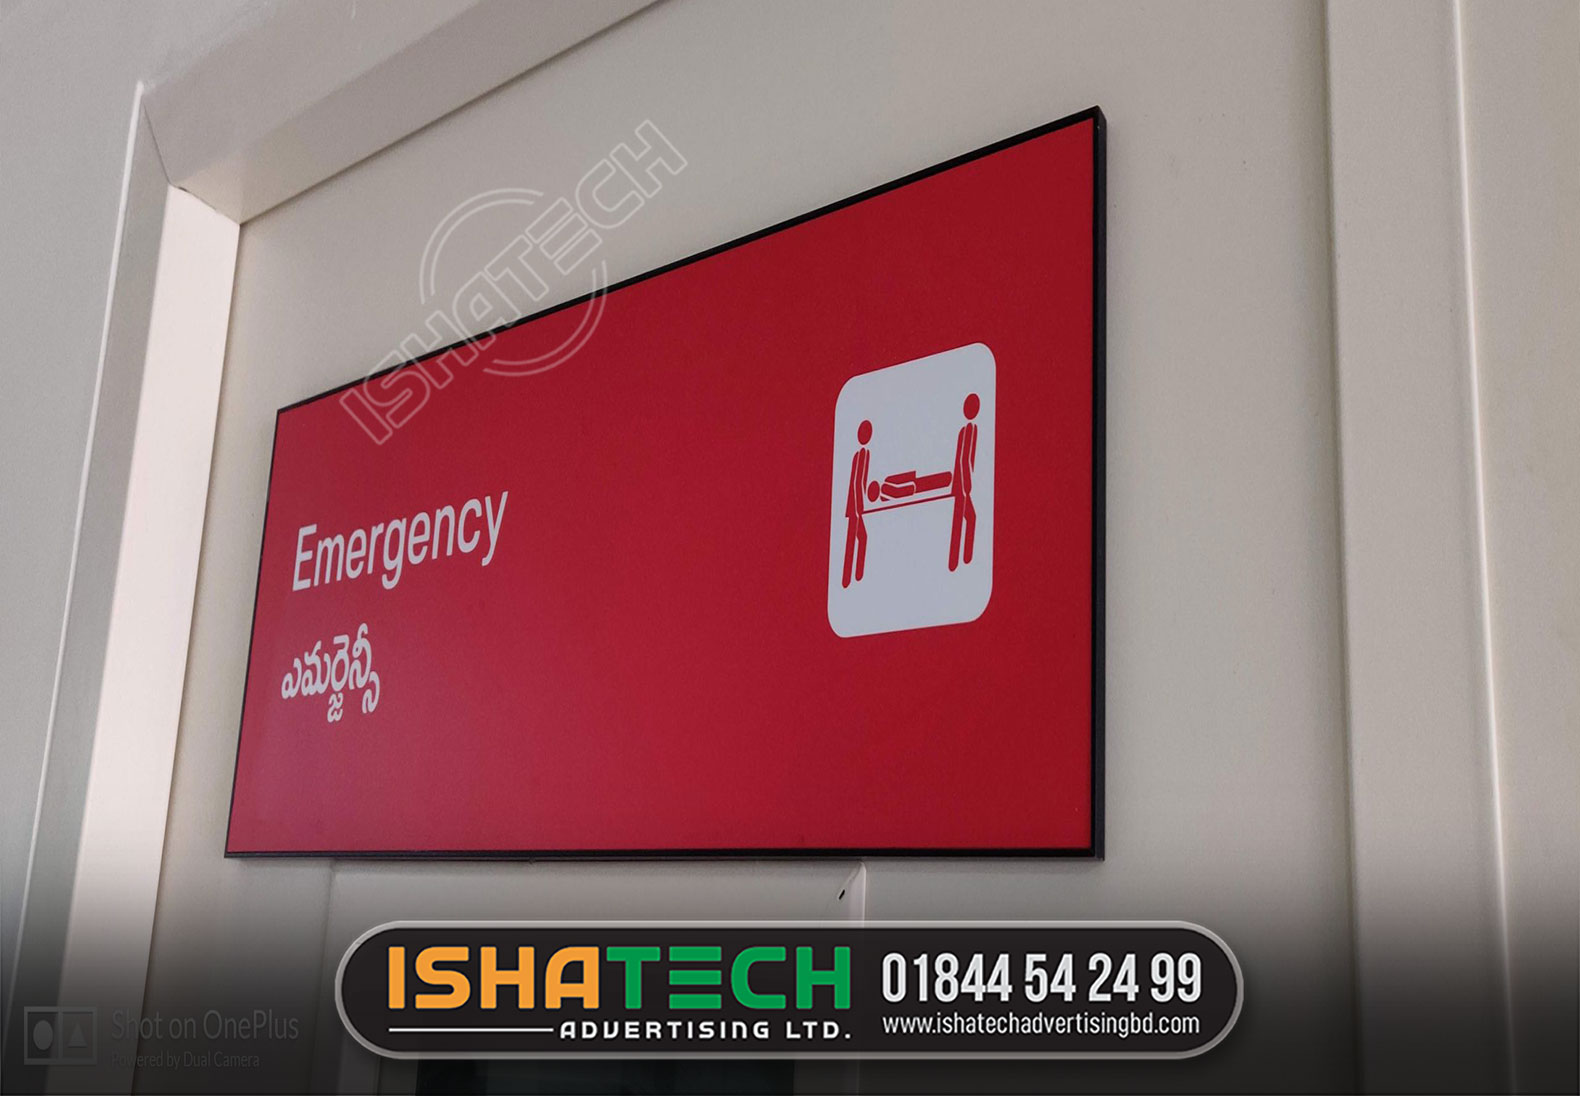 EMERGENCY ROOM NAME PALTE MAKING BY ISHATECH ADVERTISINT LTD